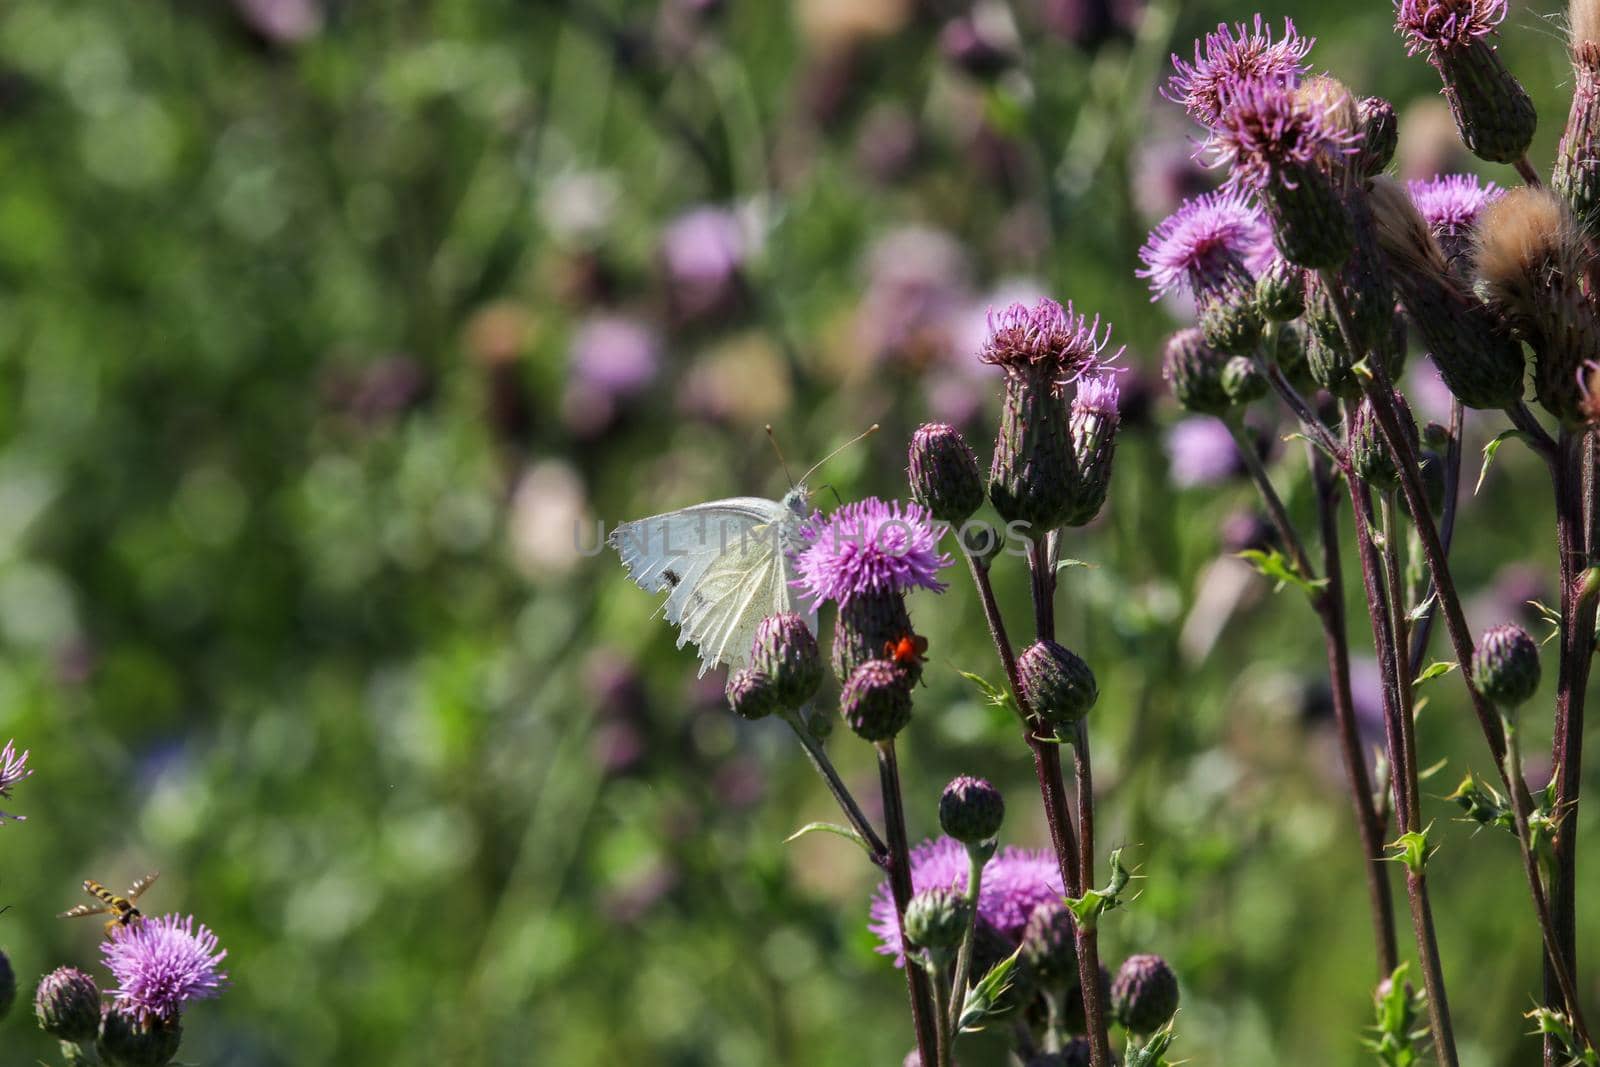 Cabbage white butterfly sitting on thistle blossom by reinerc